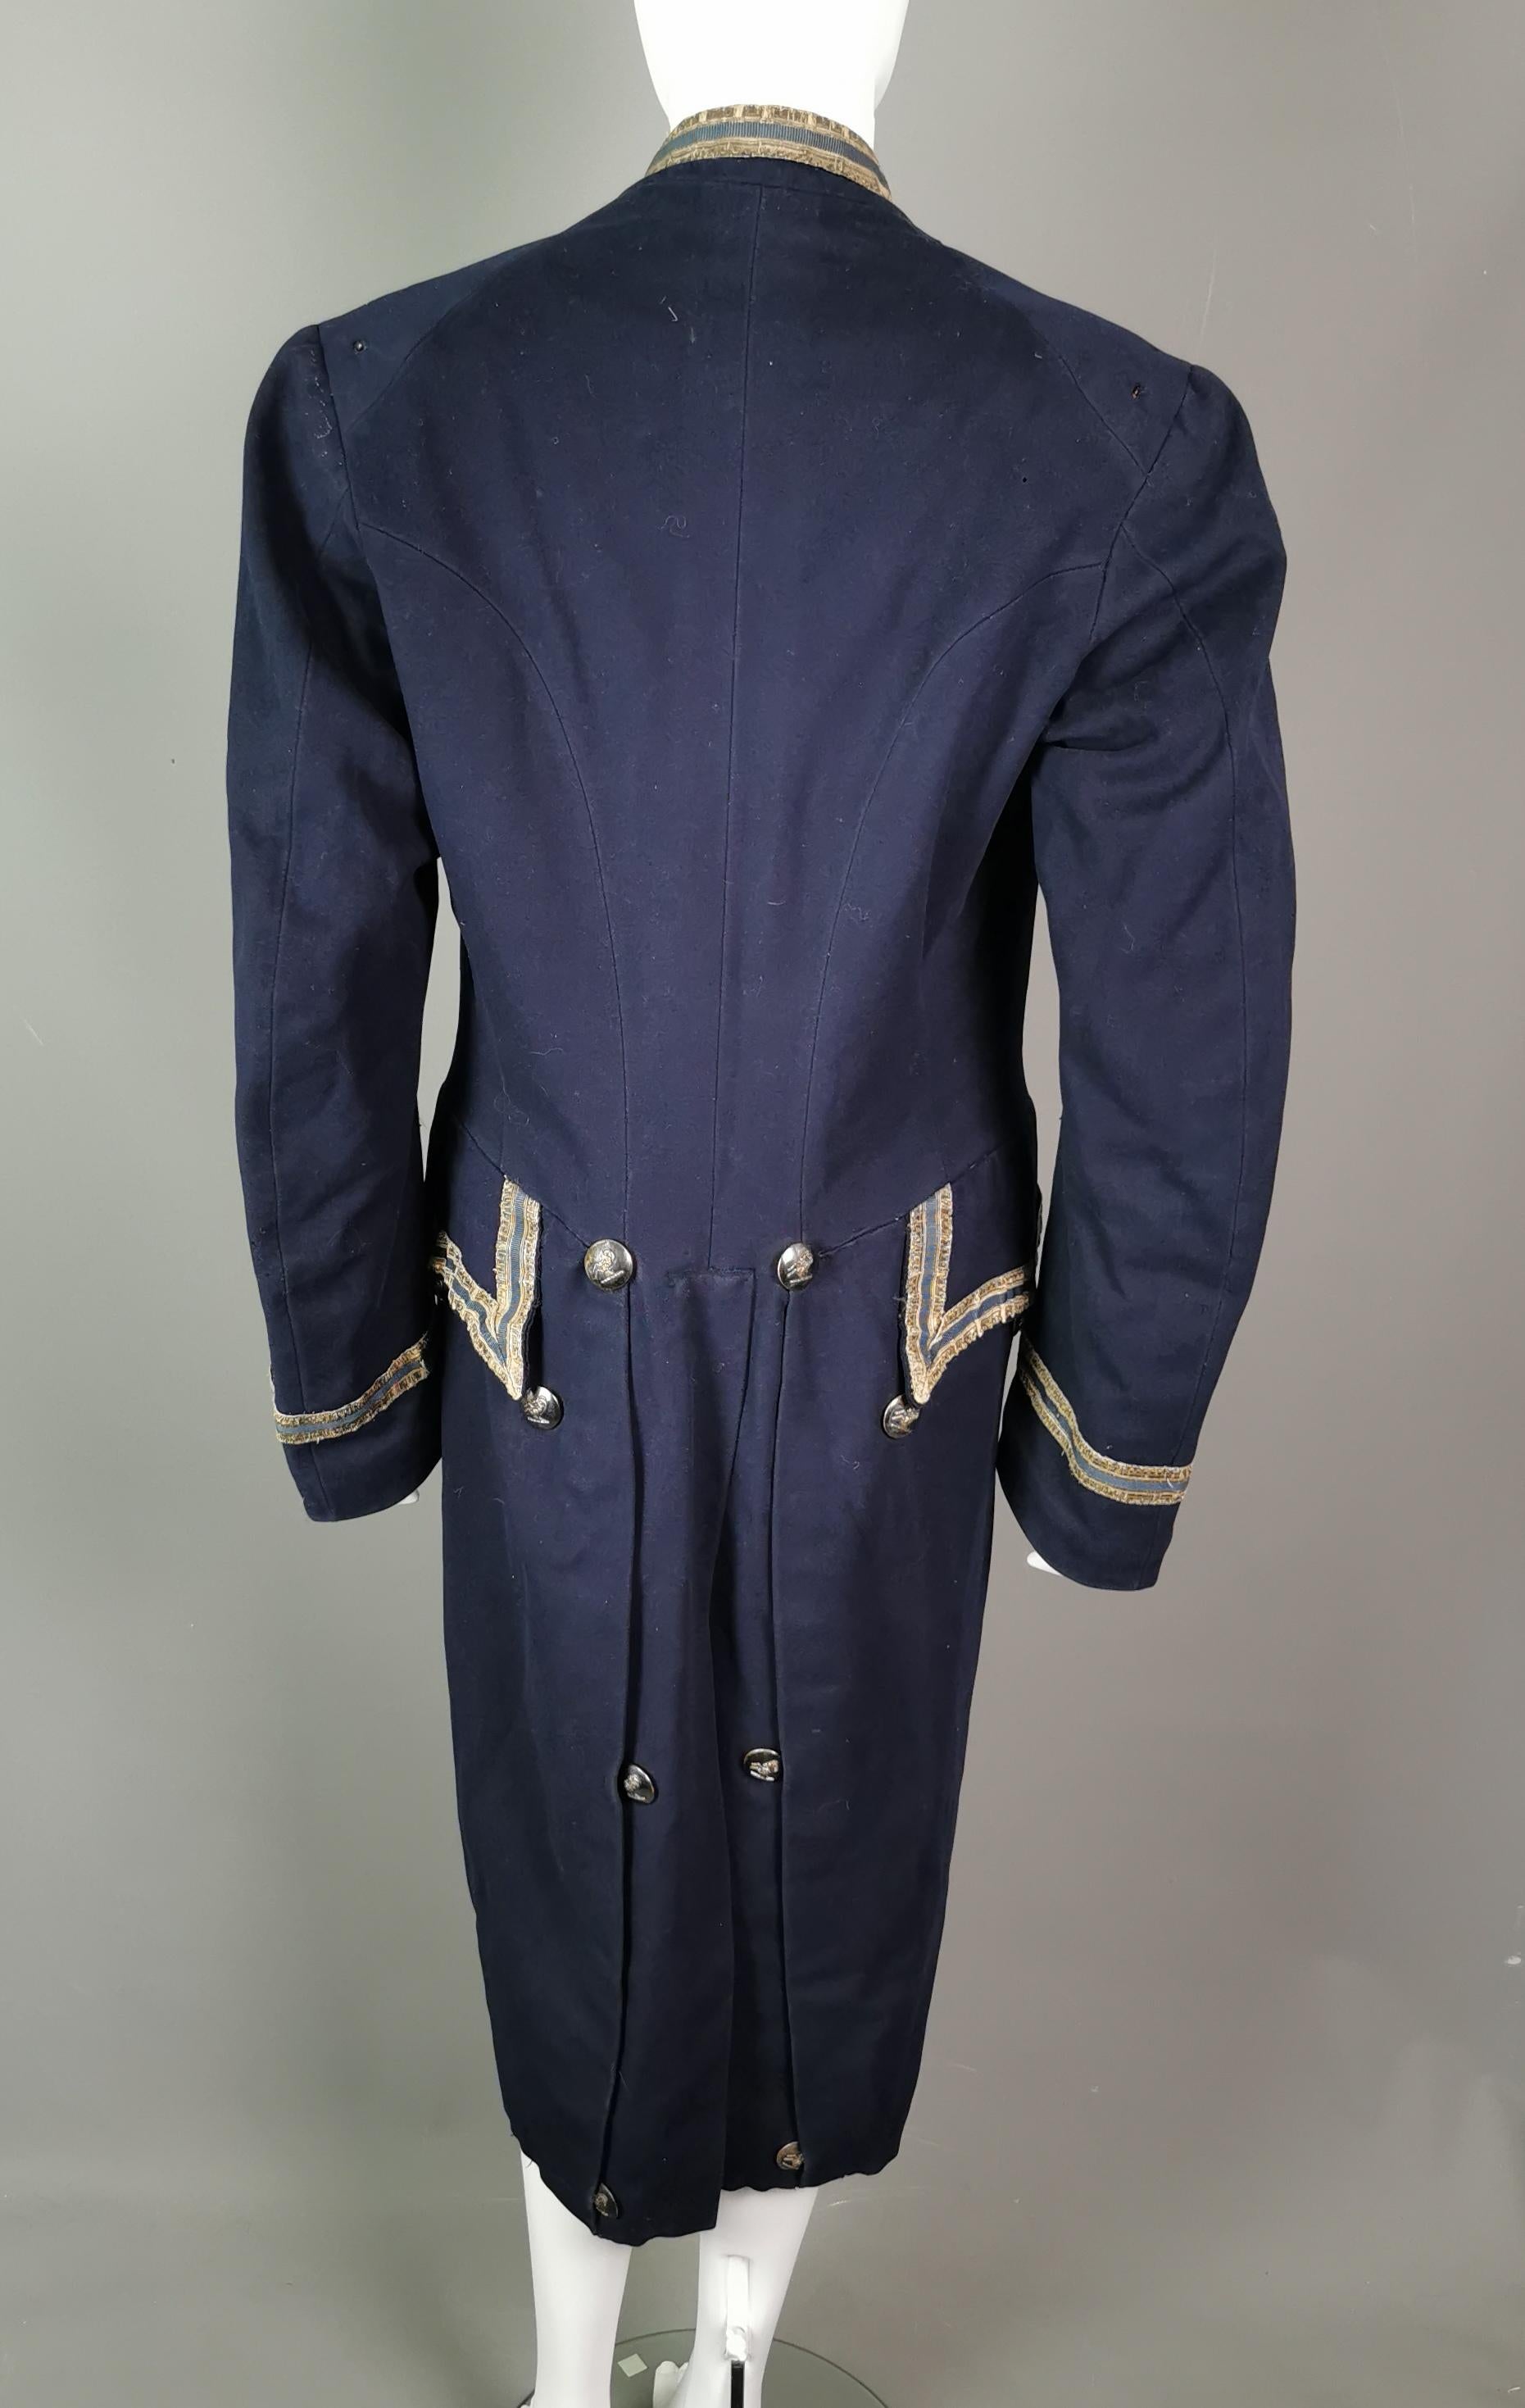 Antique theatrical costume, 18th century military style frock coat, Edwardian  2